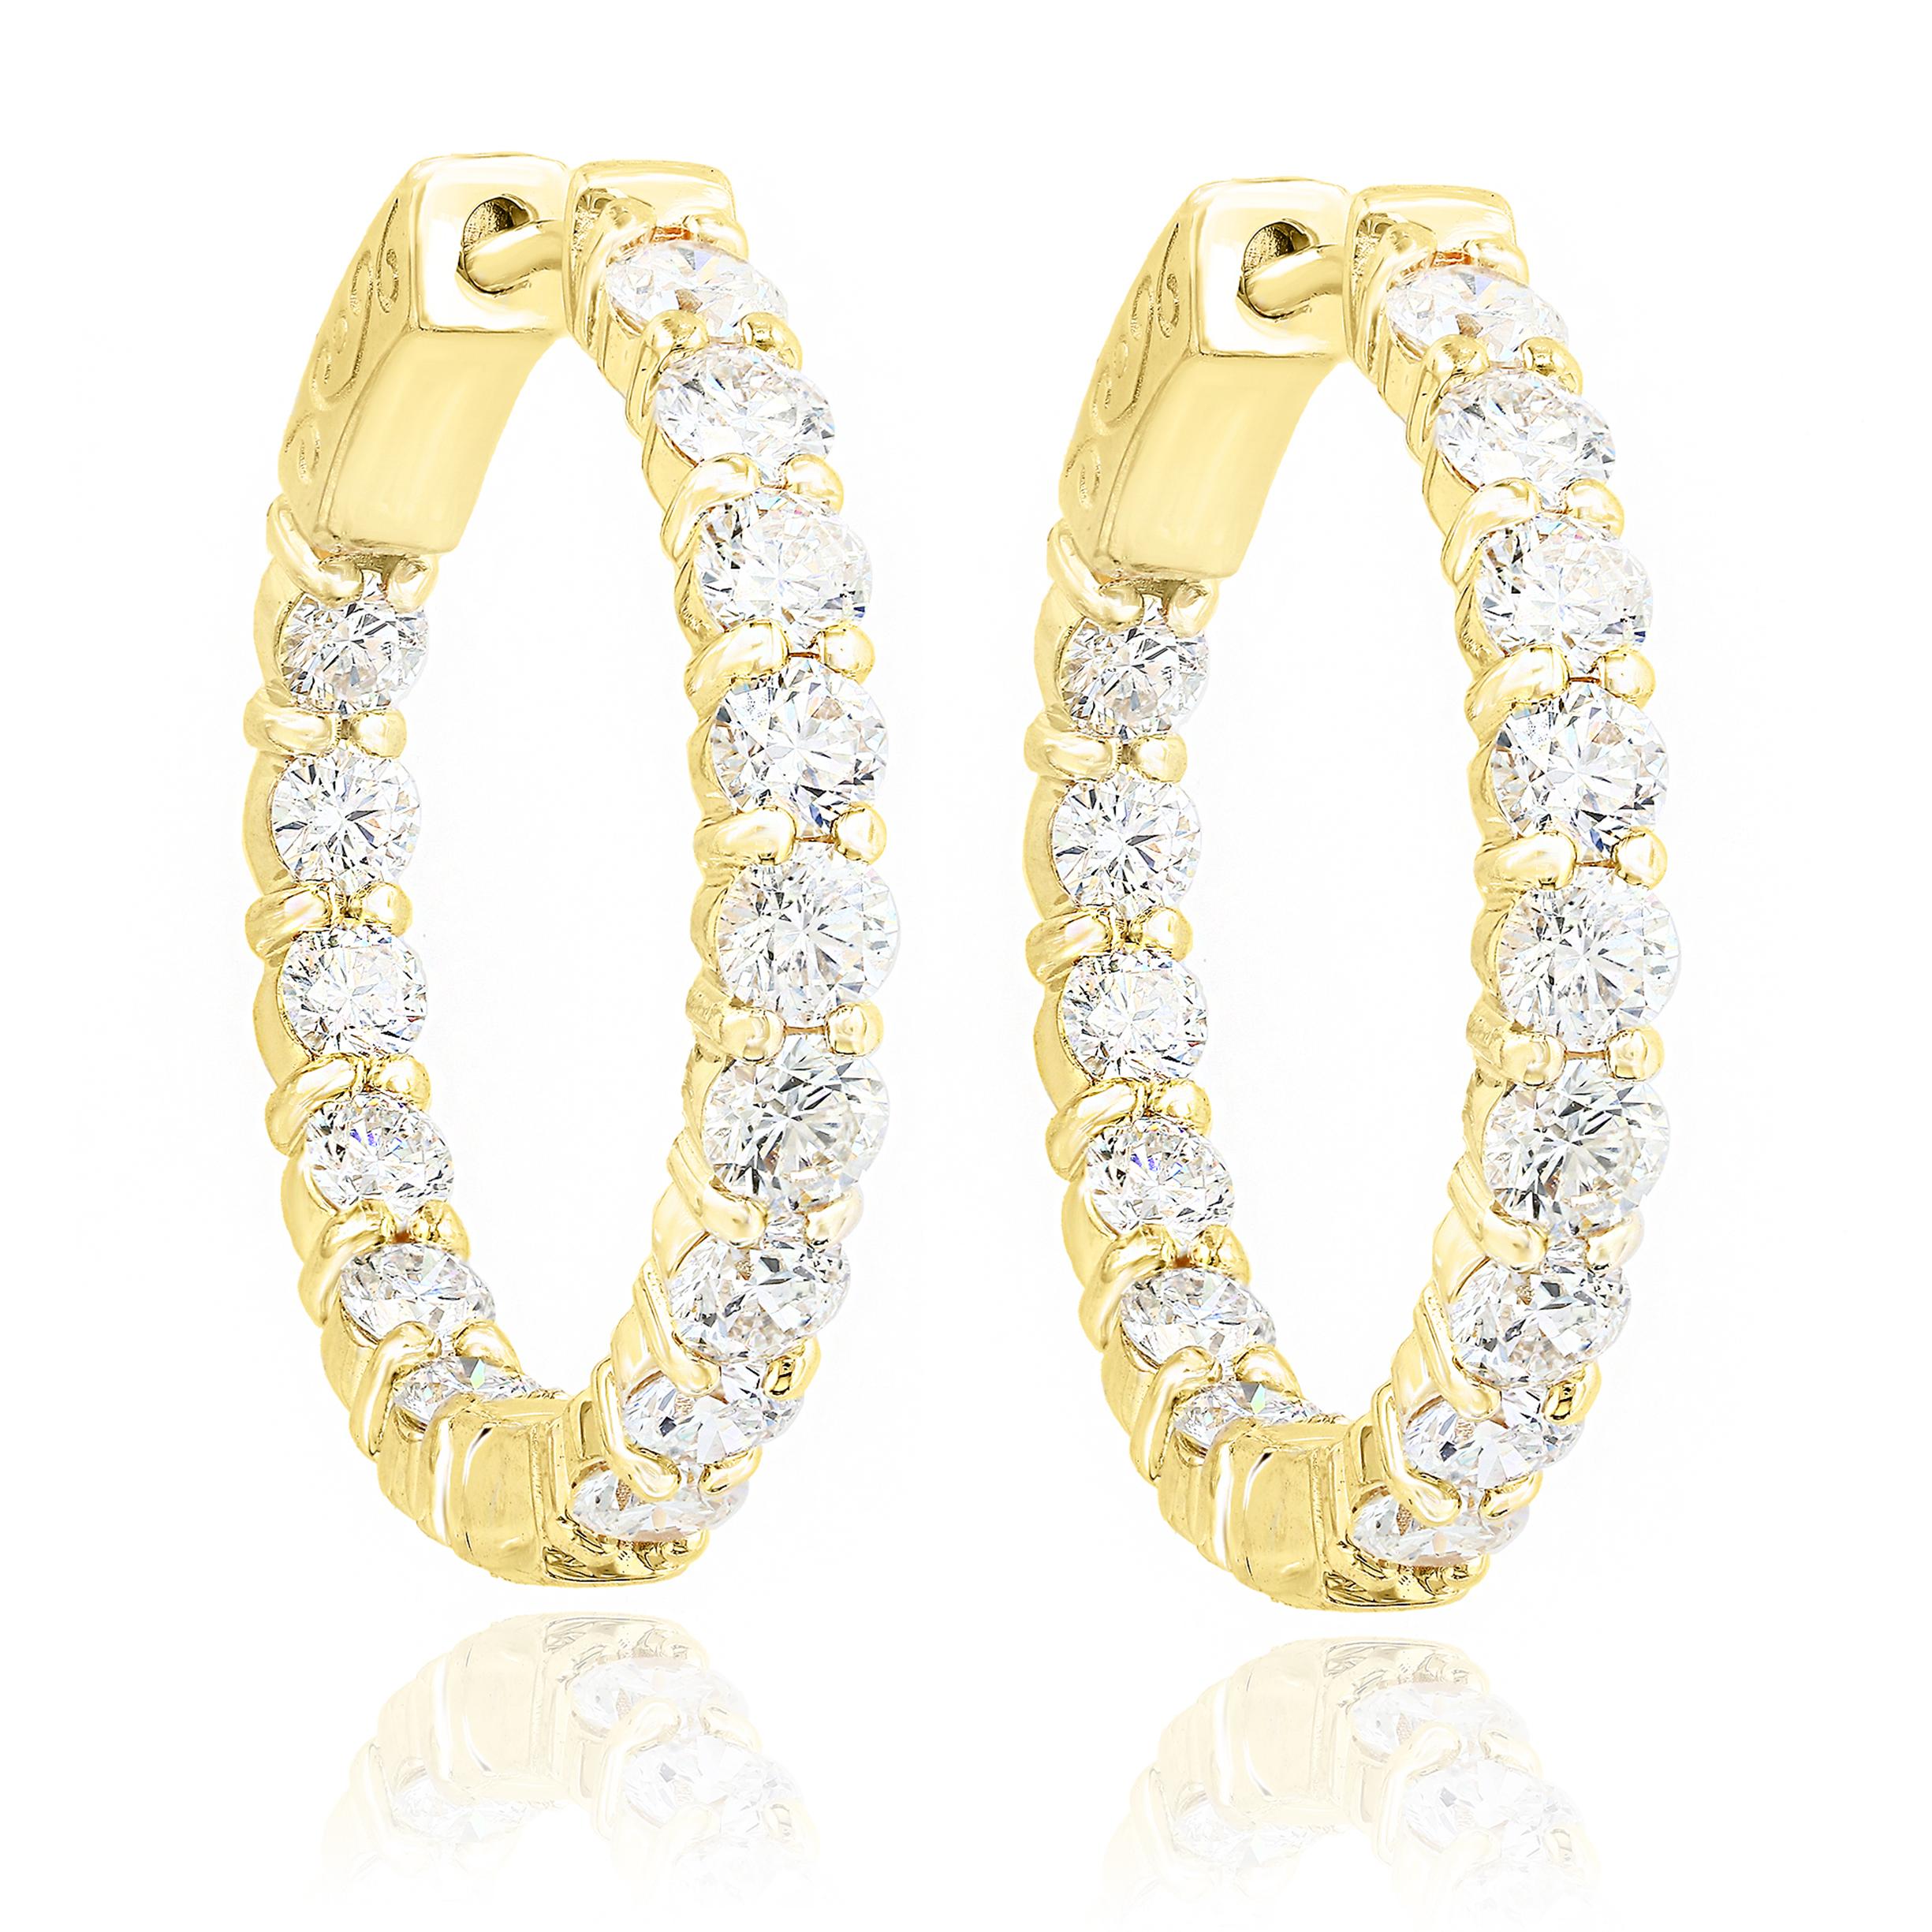 A chic and fashionable pair of hoop earrings showcasing  round diamonds, set in 14k yellow gold.  30 Round diamonds weigh 3.15 carats total. A beautiful piece of jewelry.


All diamonds are GH color SI1 Clarity.
Available in Yellow and Rose Gold as